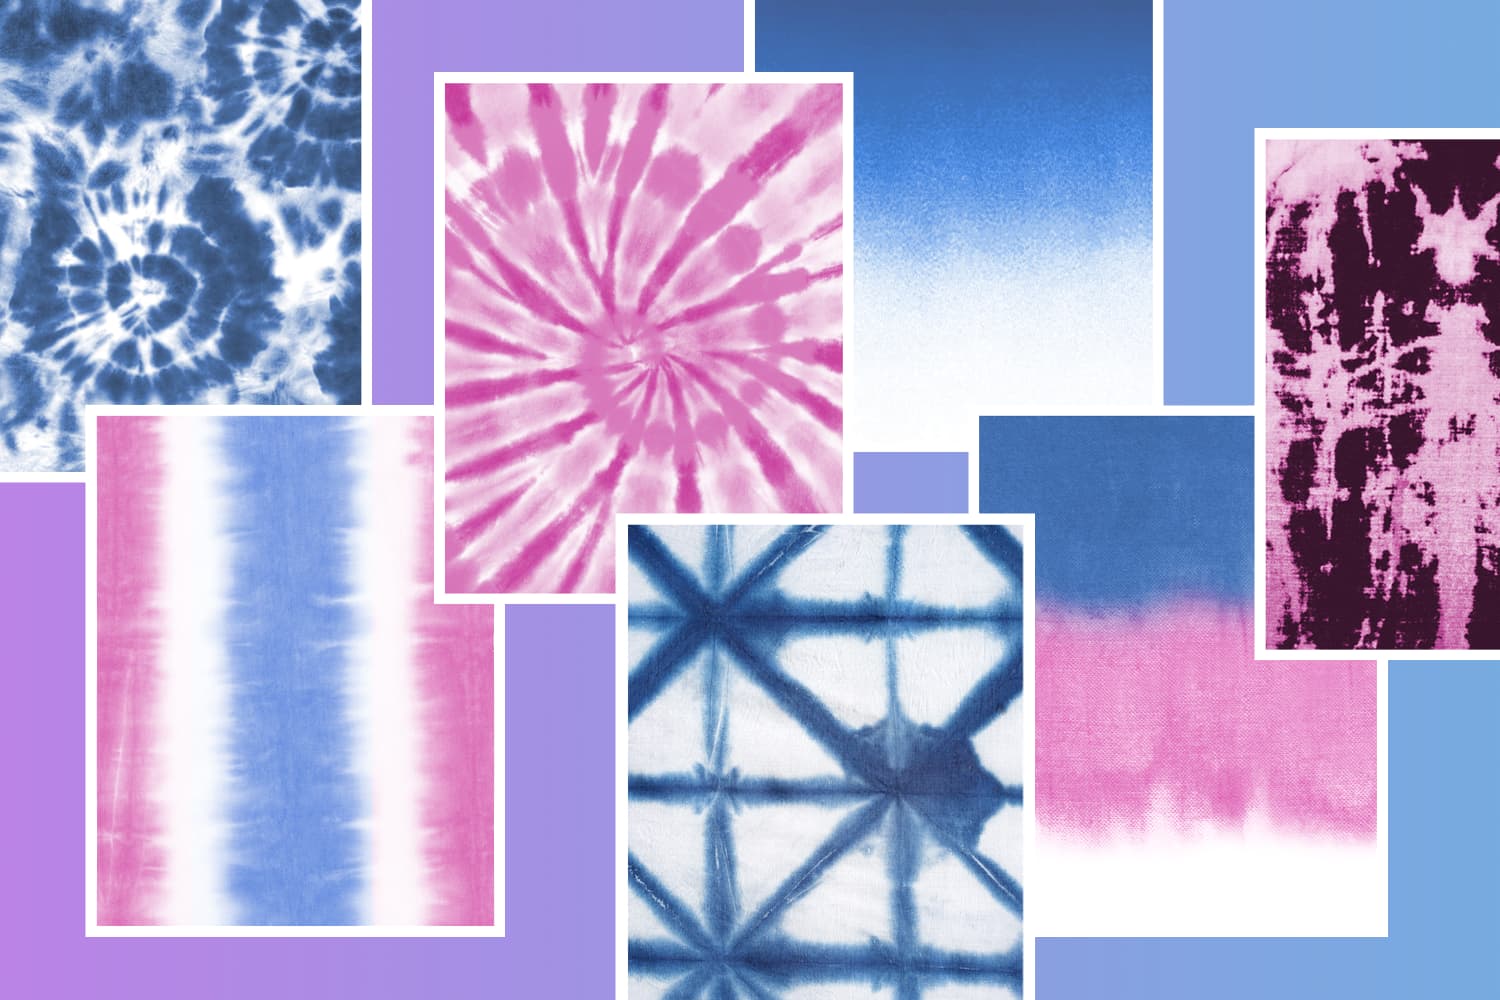 100+ Tie-dye Patterns and Ideas